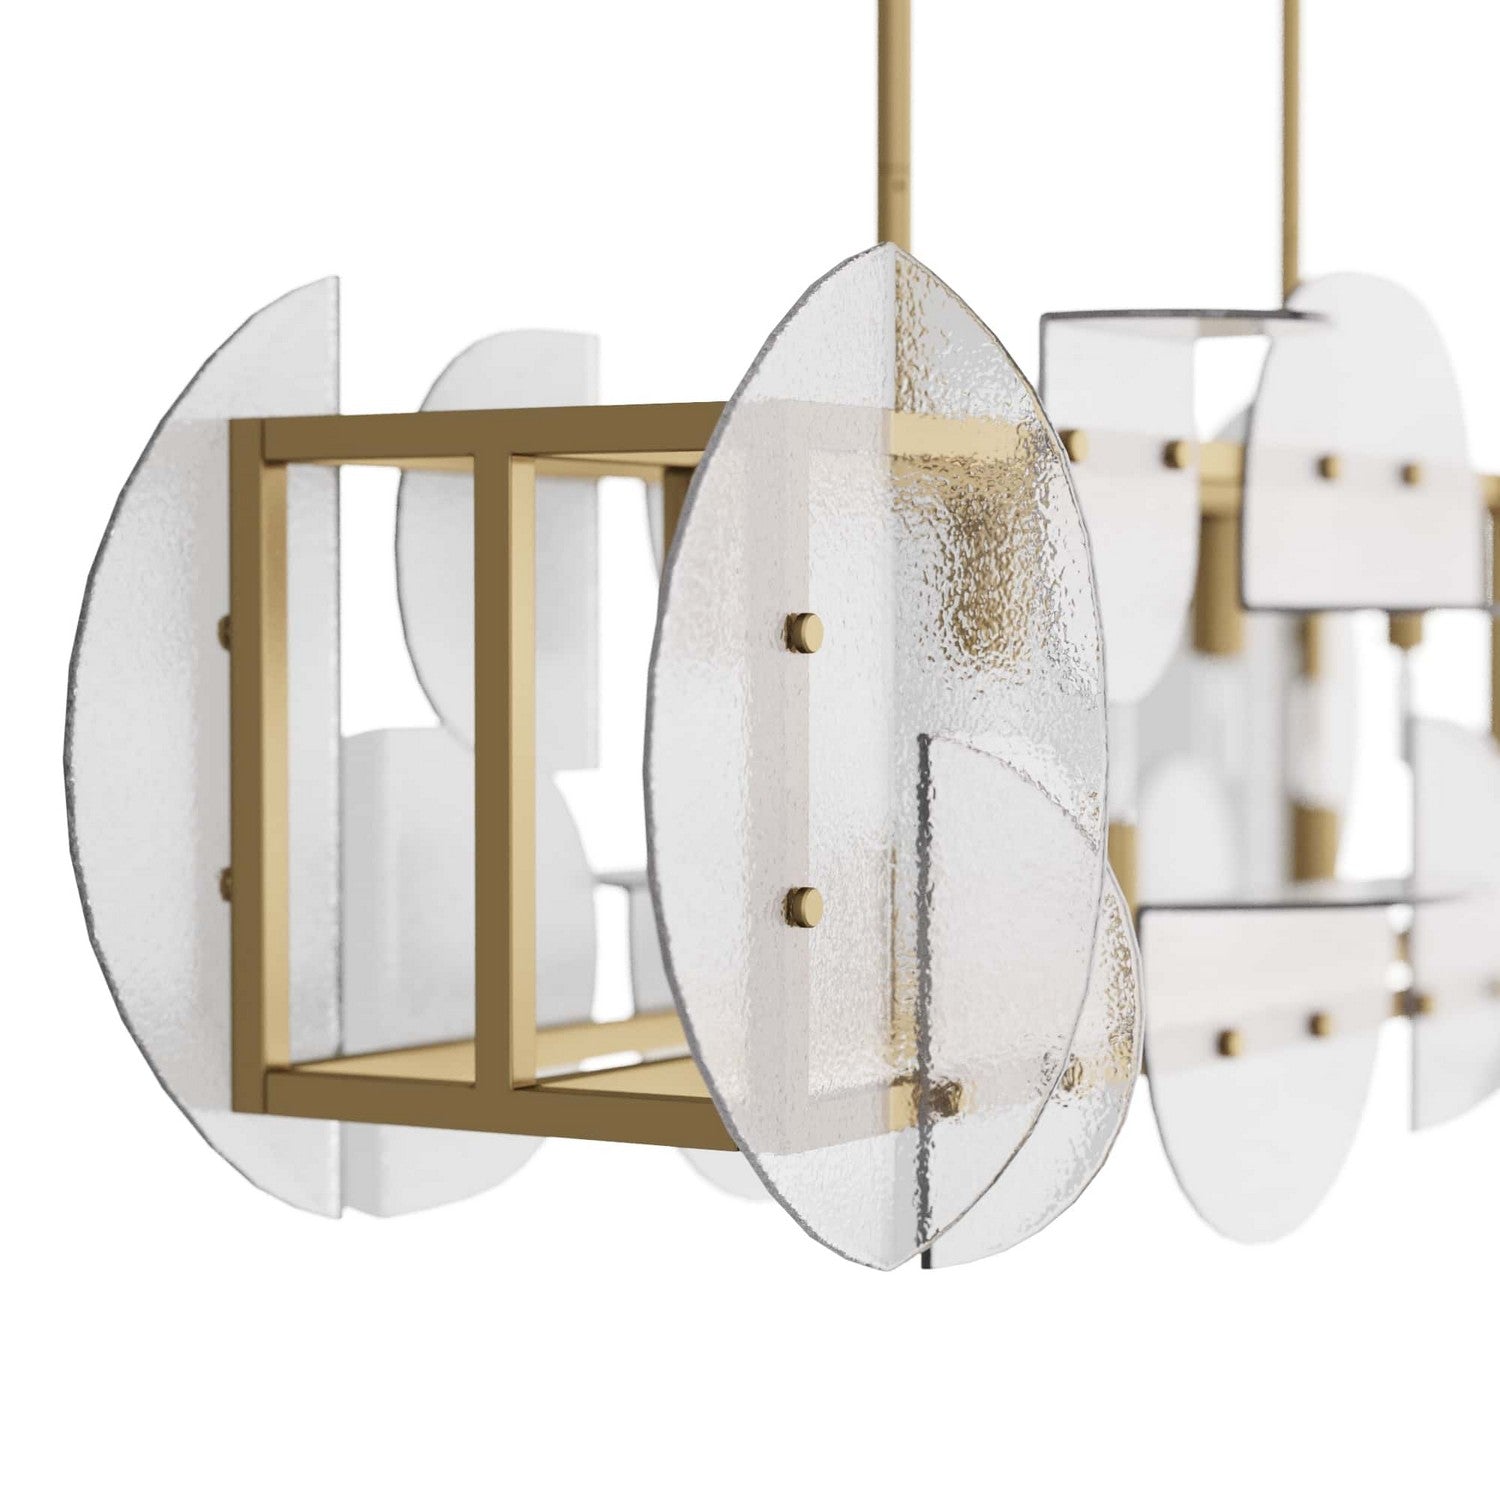 Seven Light Chandelier from the Tilley collection in Antique Brass finish